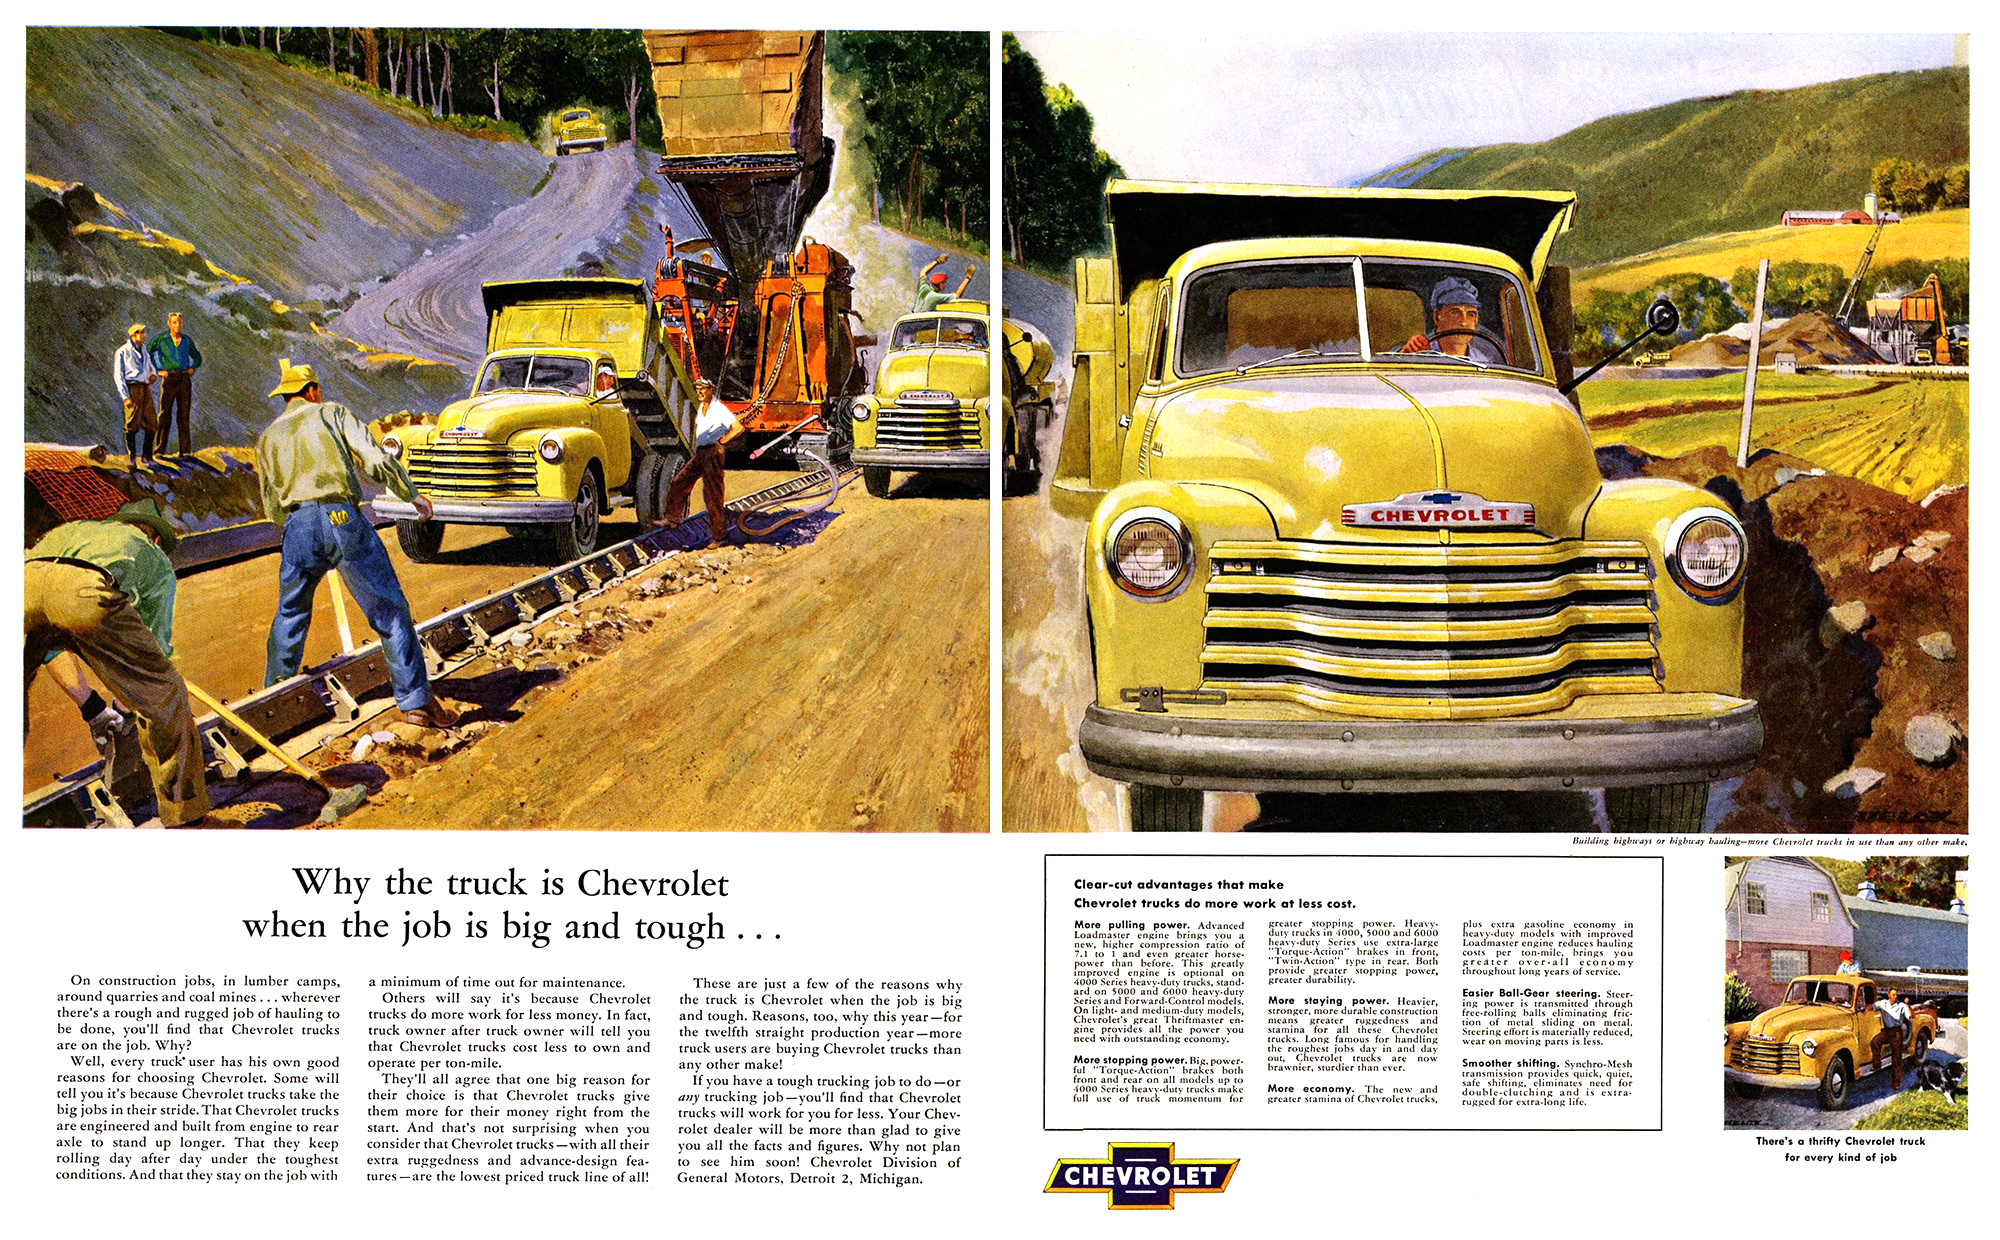 Chevrolet Trucks Ad (September, 1953): Illustrated by Peter Helck